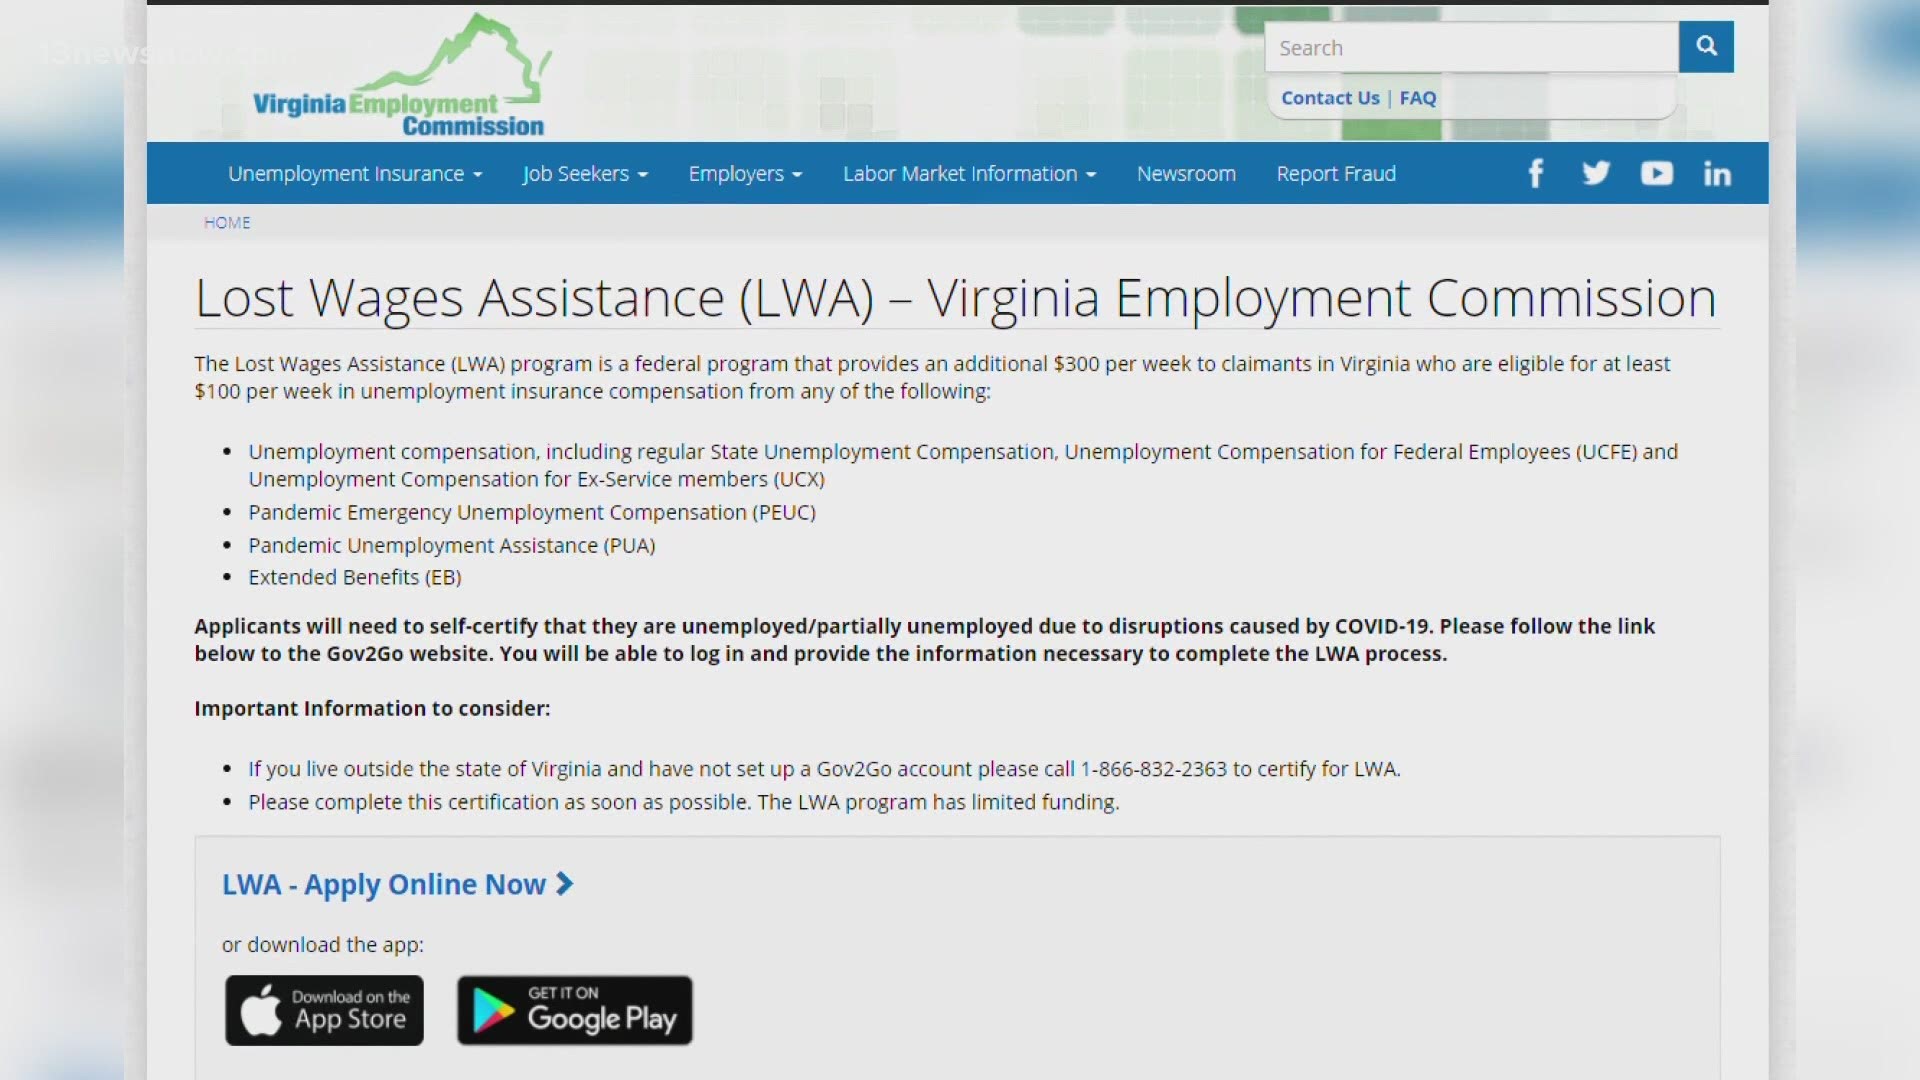 After multiple delays, the Virginia Employment Commission started paying retroactive LWA unemployment benefits on October 16. Most workers receive $1,800.